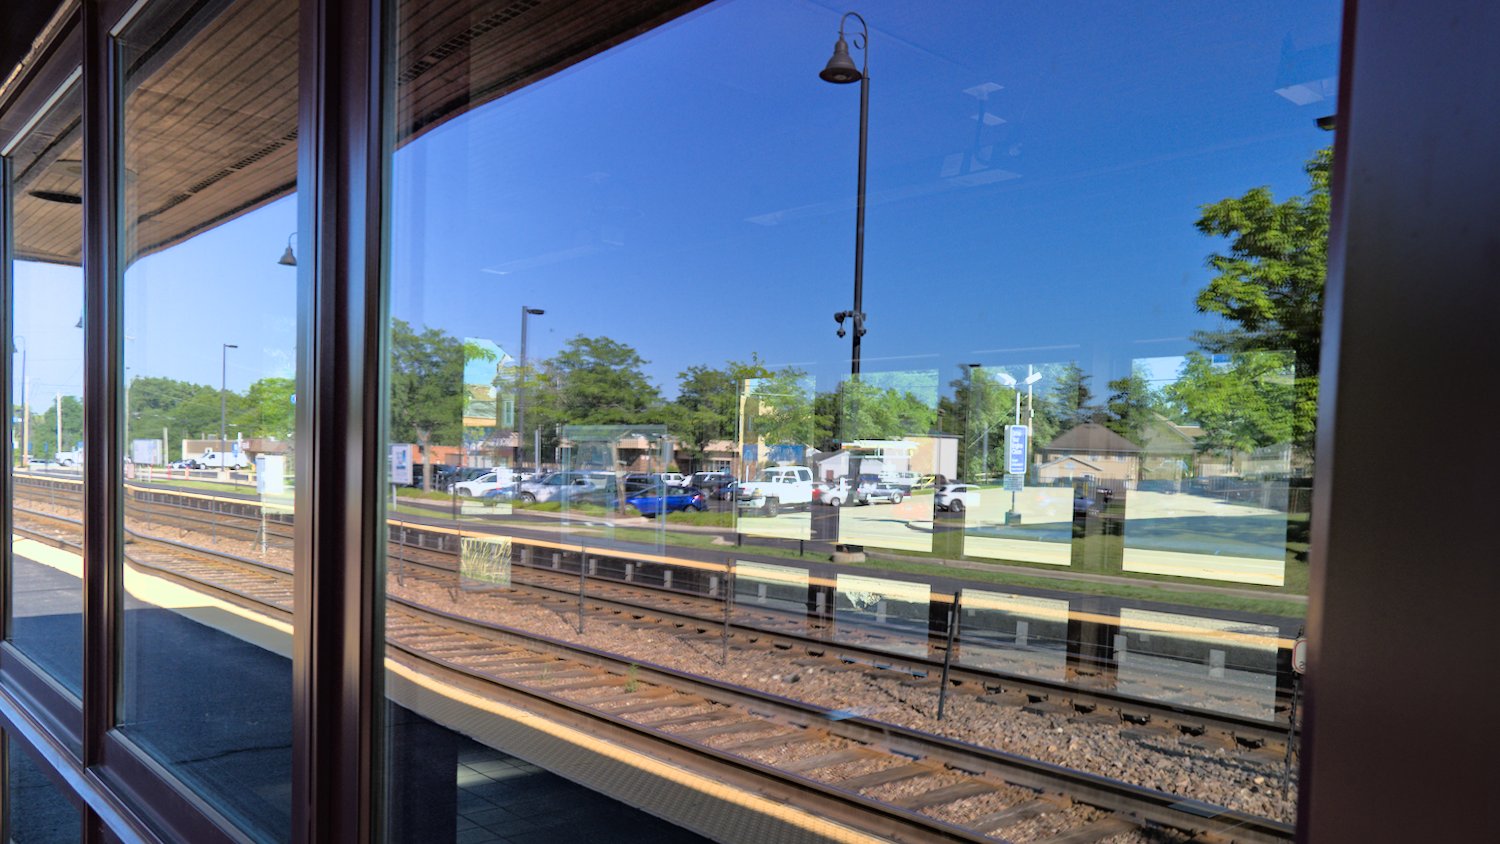 Reflections and pass-through view through the waiting shelter at the train station.